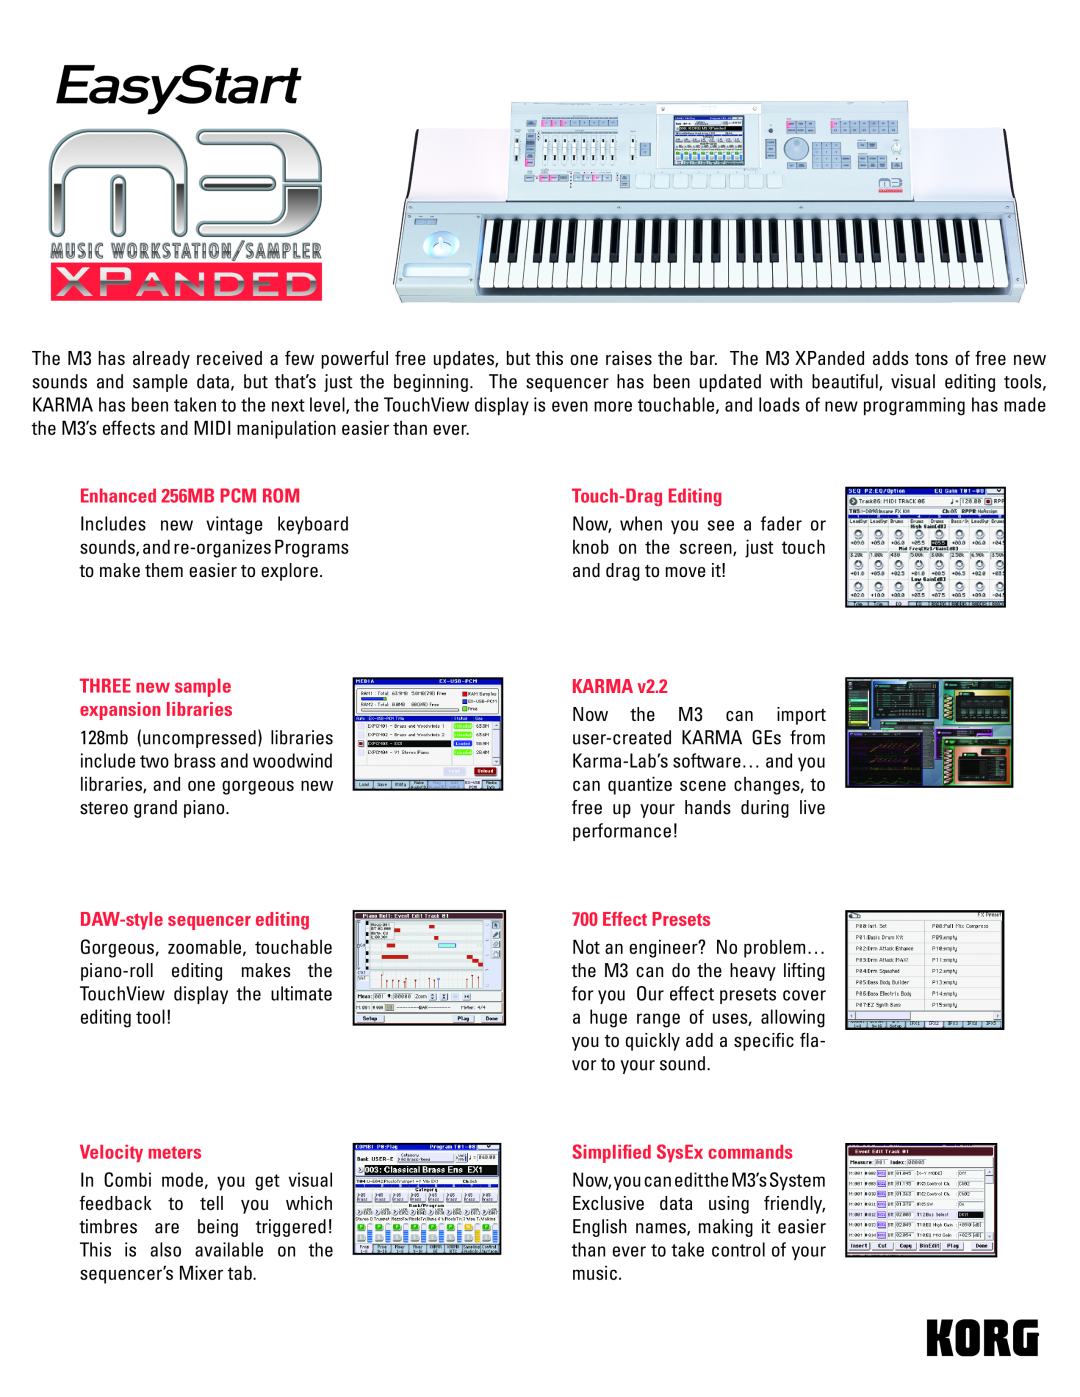 Korg M3 manual EasyStart, Enhanced 256MB PCM ROM, DAW-style sequencer editing, Velocity meters, Touch-Drag Editing, Karma 